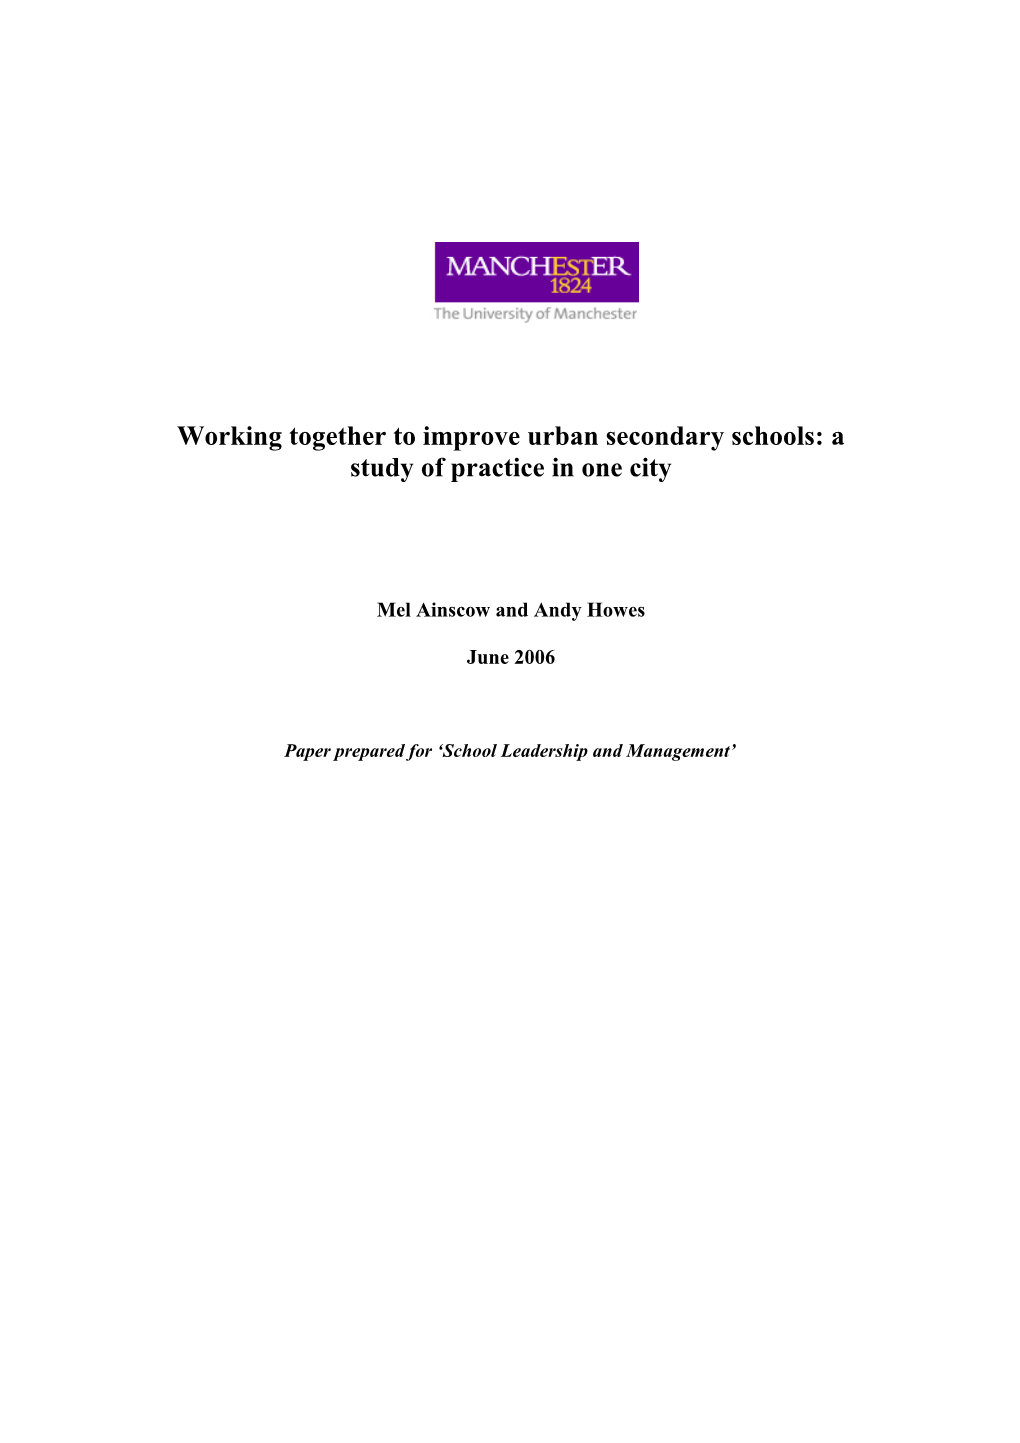 Working Together to Improve Urban Secondary Schools: a Study of Practice in One City